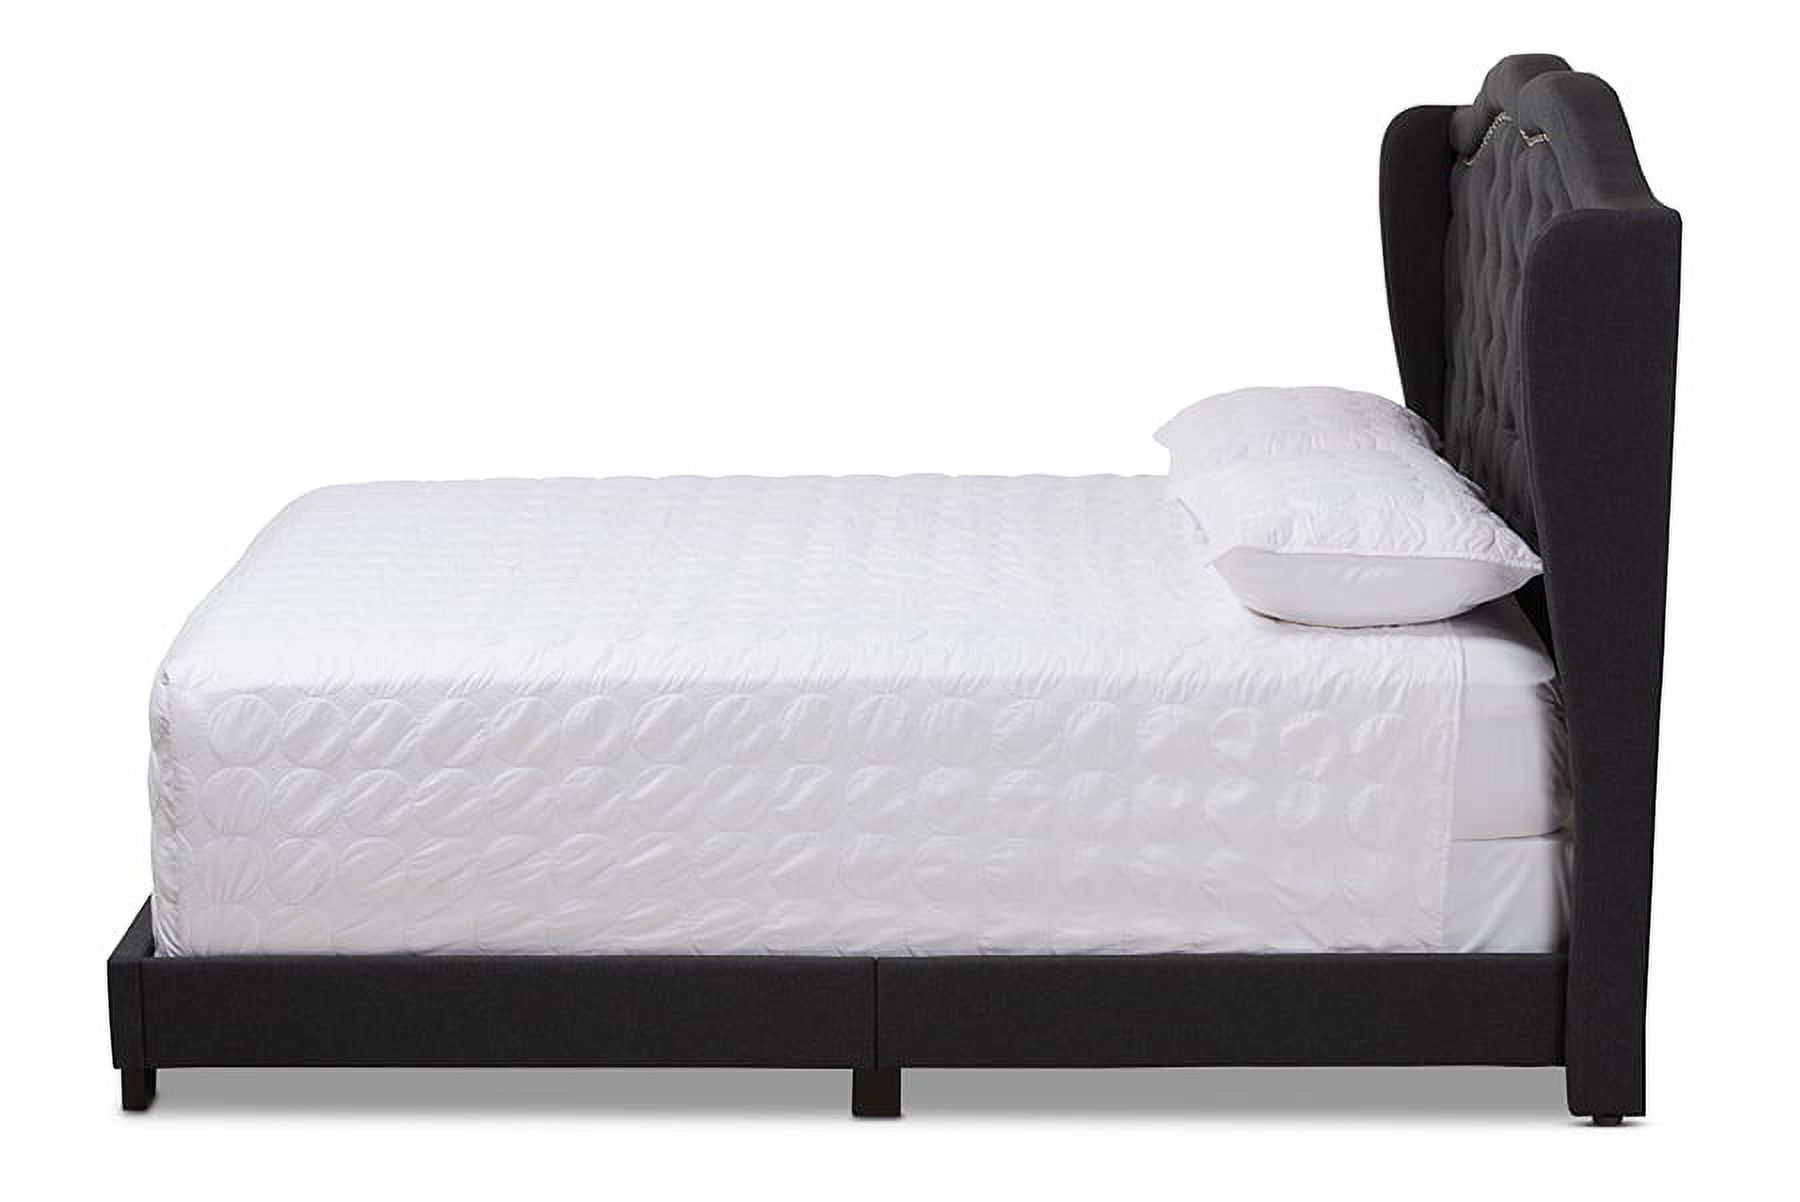 Baxton Studio Aden Modern and Contemporary Charcoal Grey Fabric Upholstered Queen Size Bed - image 3 of 6